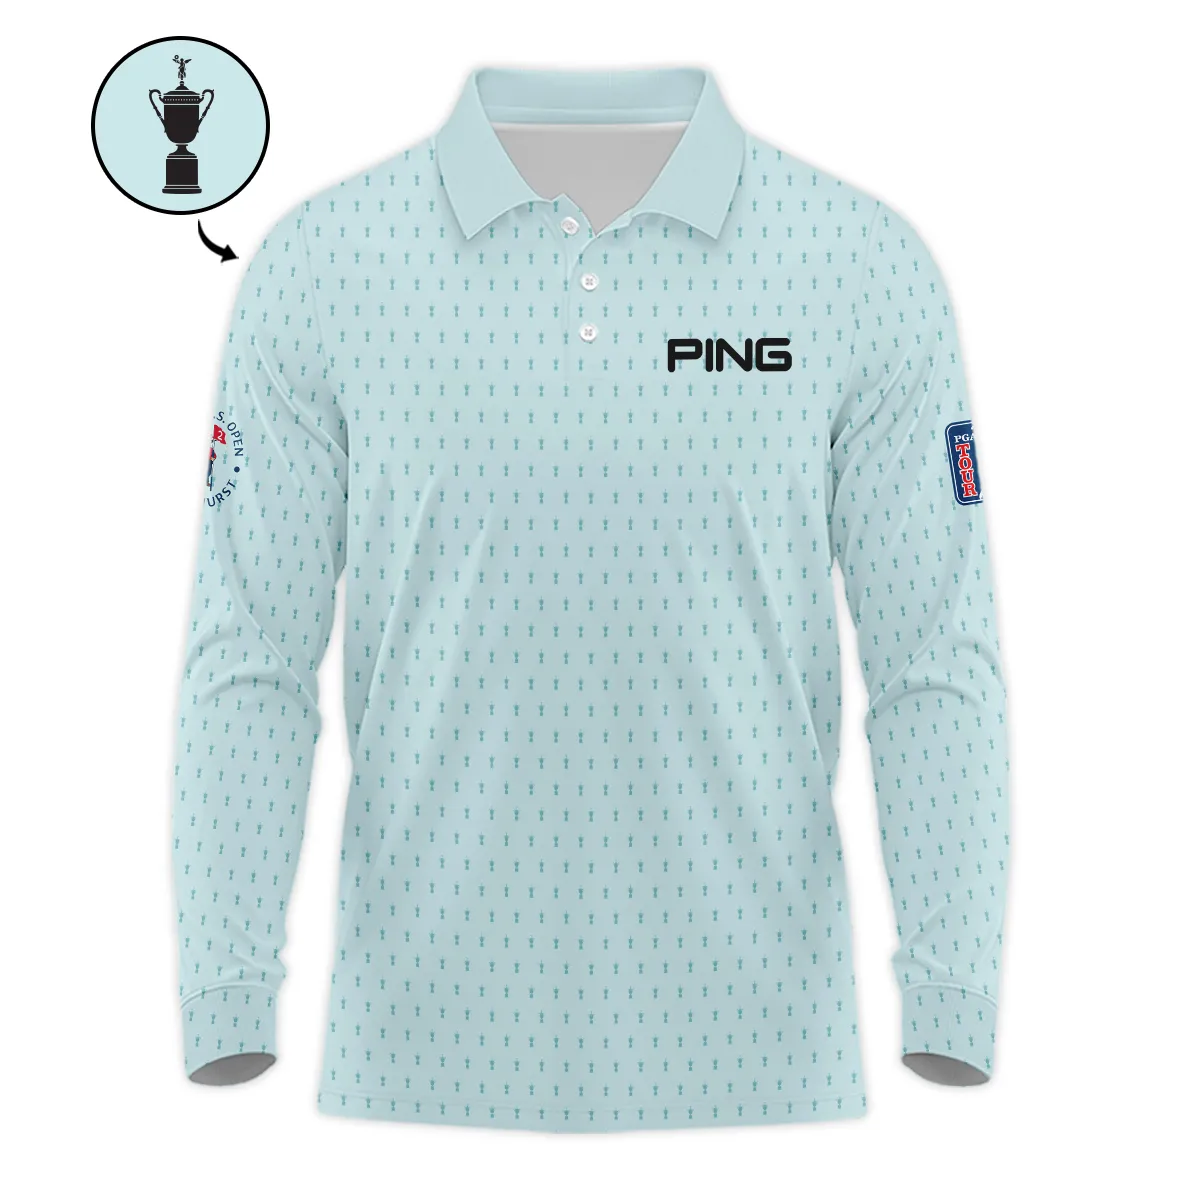 Sports 124th U.S. Open Ping Pinehurst Polo Shirt Cup Pattern Pastel Green All Over Print Polo Shirt For Men